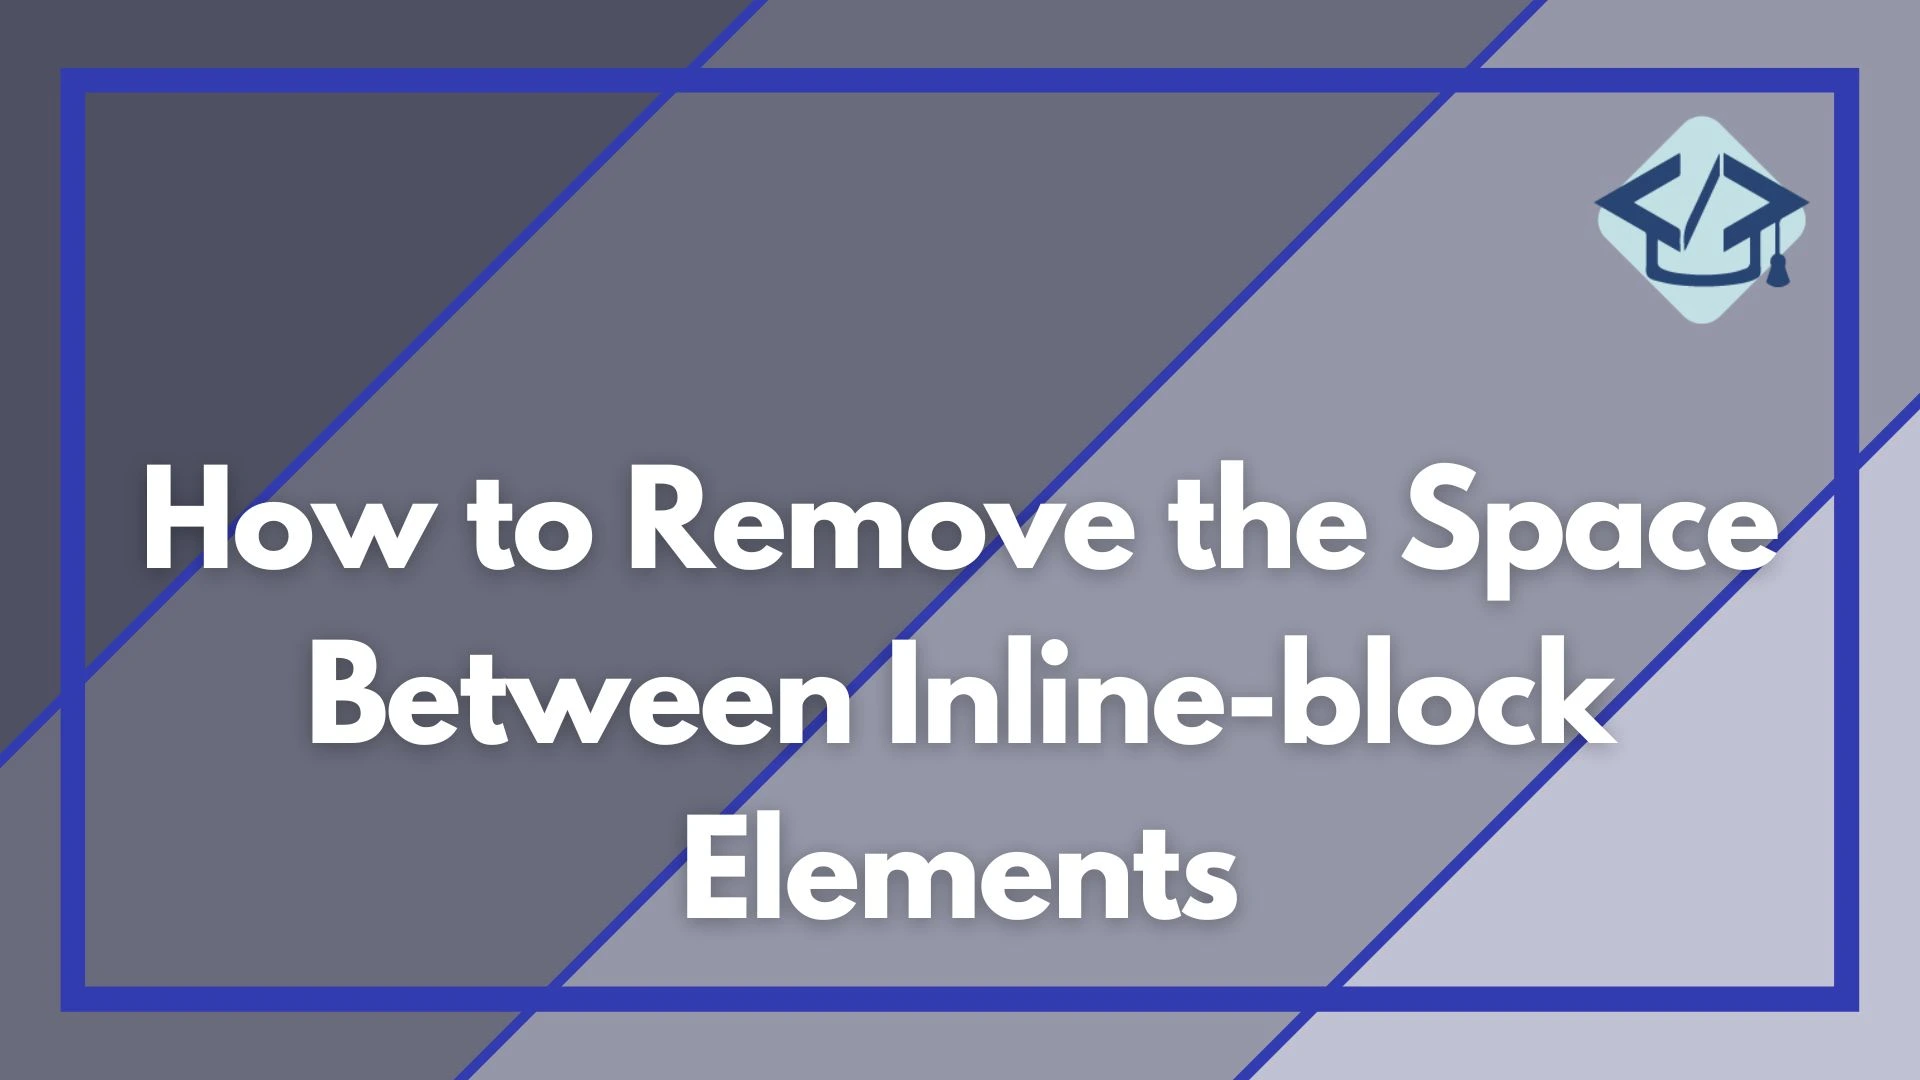 You are currently viewing How to Remove the Space Between Inline-block Elements